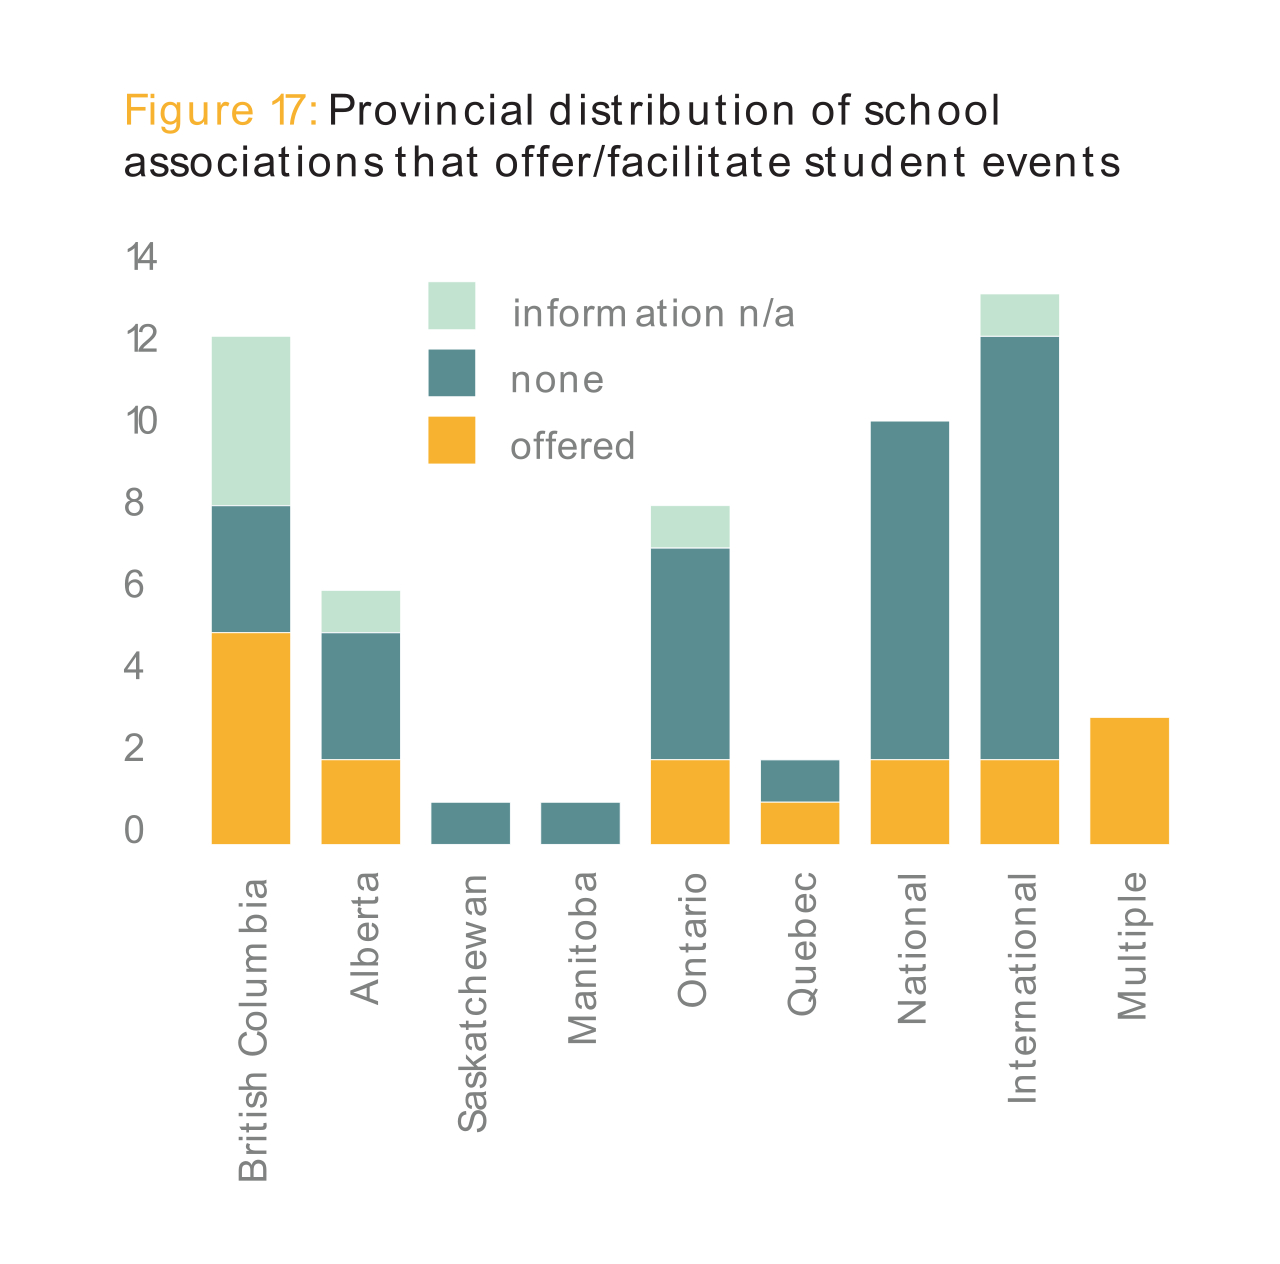 Figure 17: Provincial distribution of school associations that offer/facilitate student events